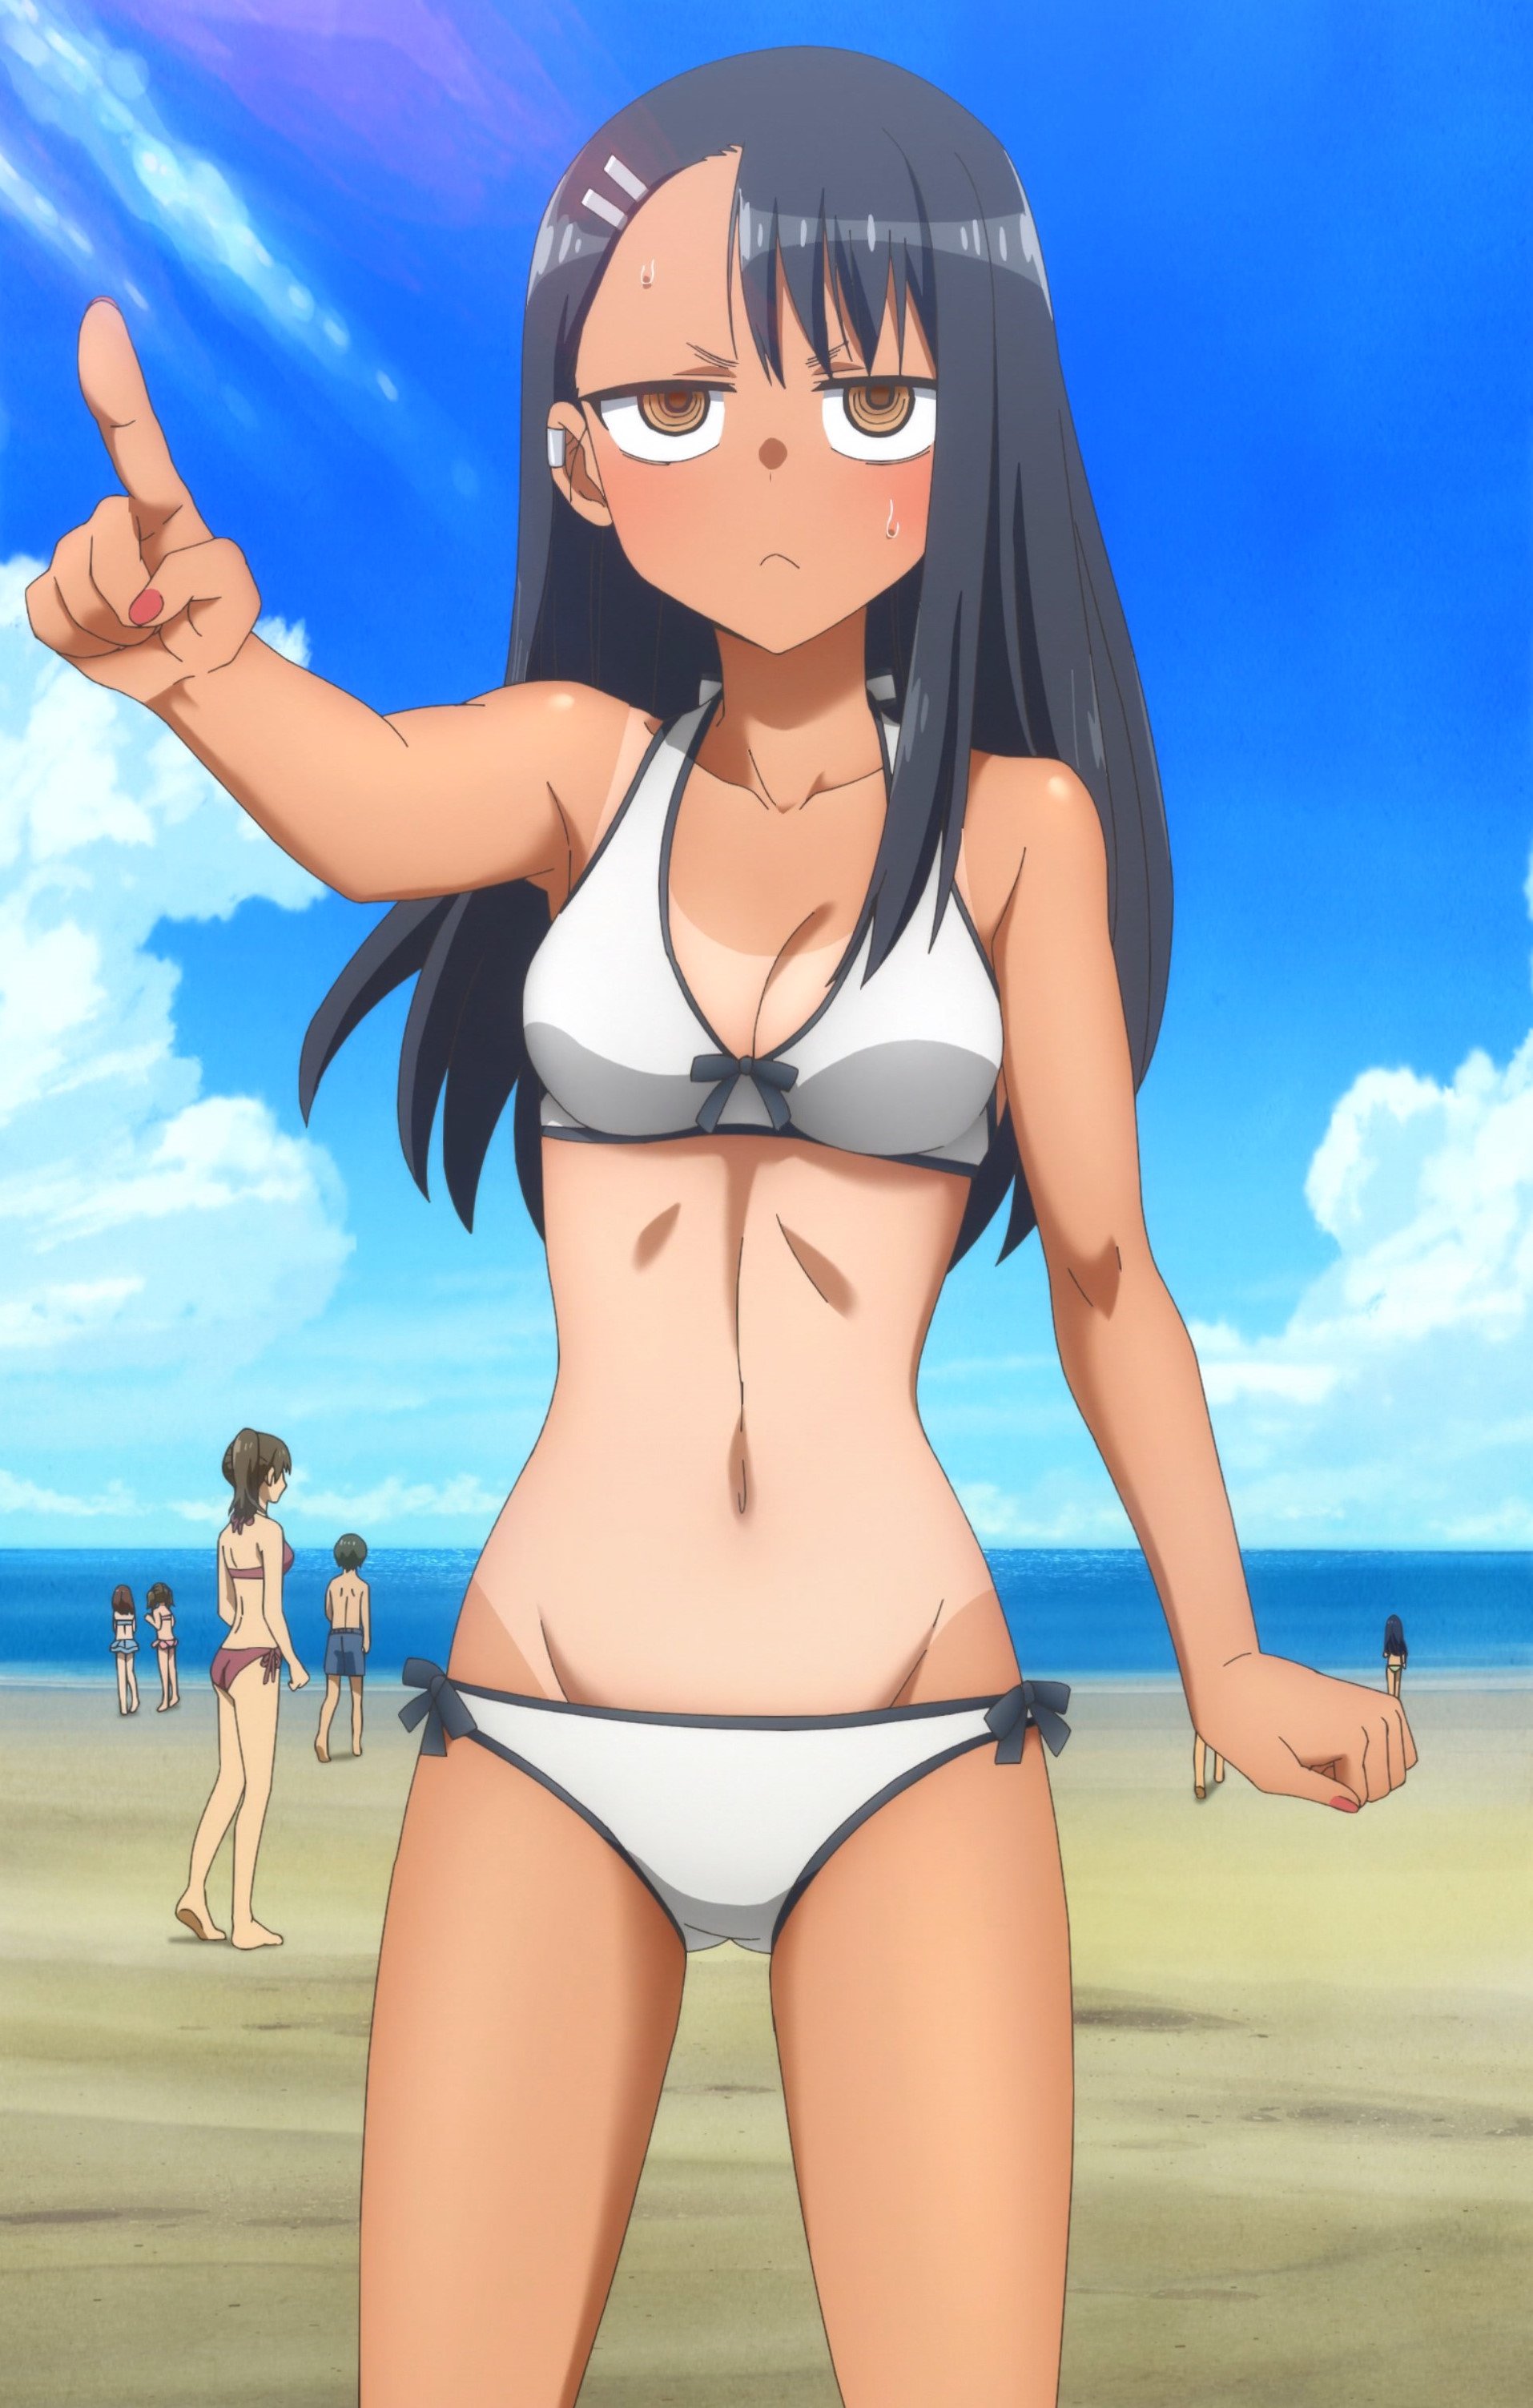 DON'T TOY WITH ME, MISS NAGATORO You're Such a Wimp, Senpai ♥ / Senpai!  Let's Go to the Beach!! - Watch on Crunchyroll